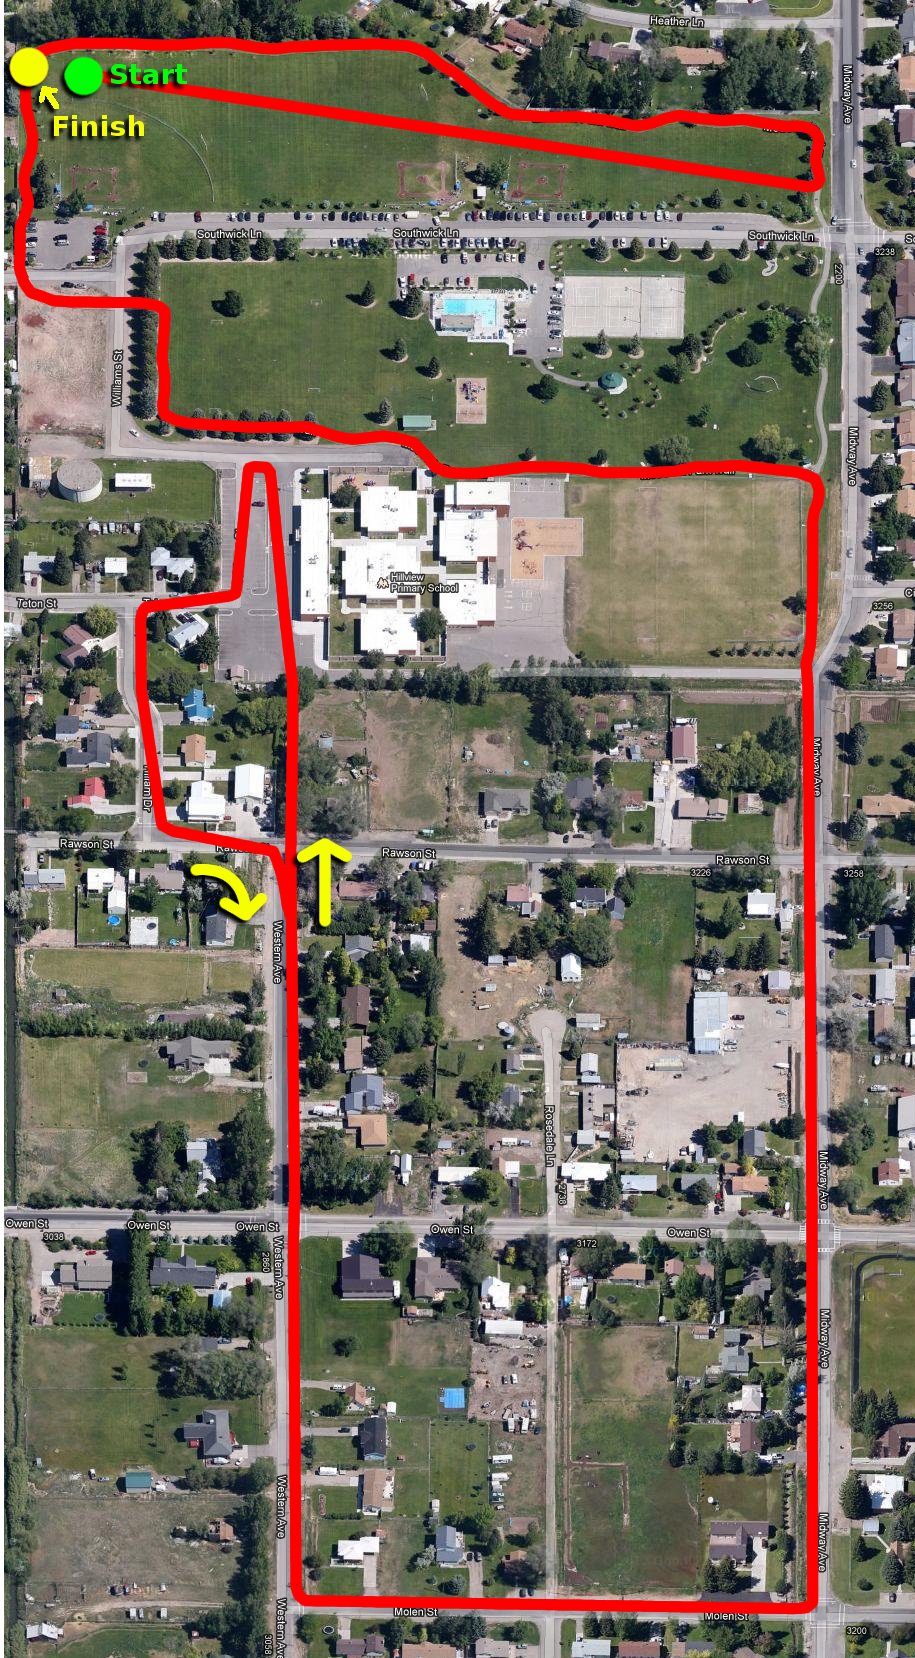 An overhead view of McCowin Park and the Willie Free 5K race route